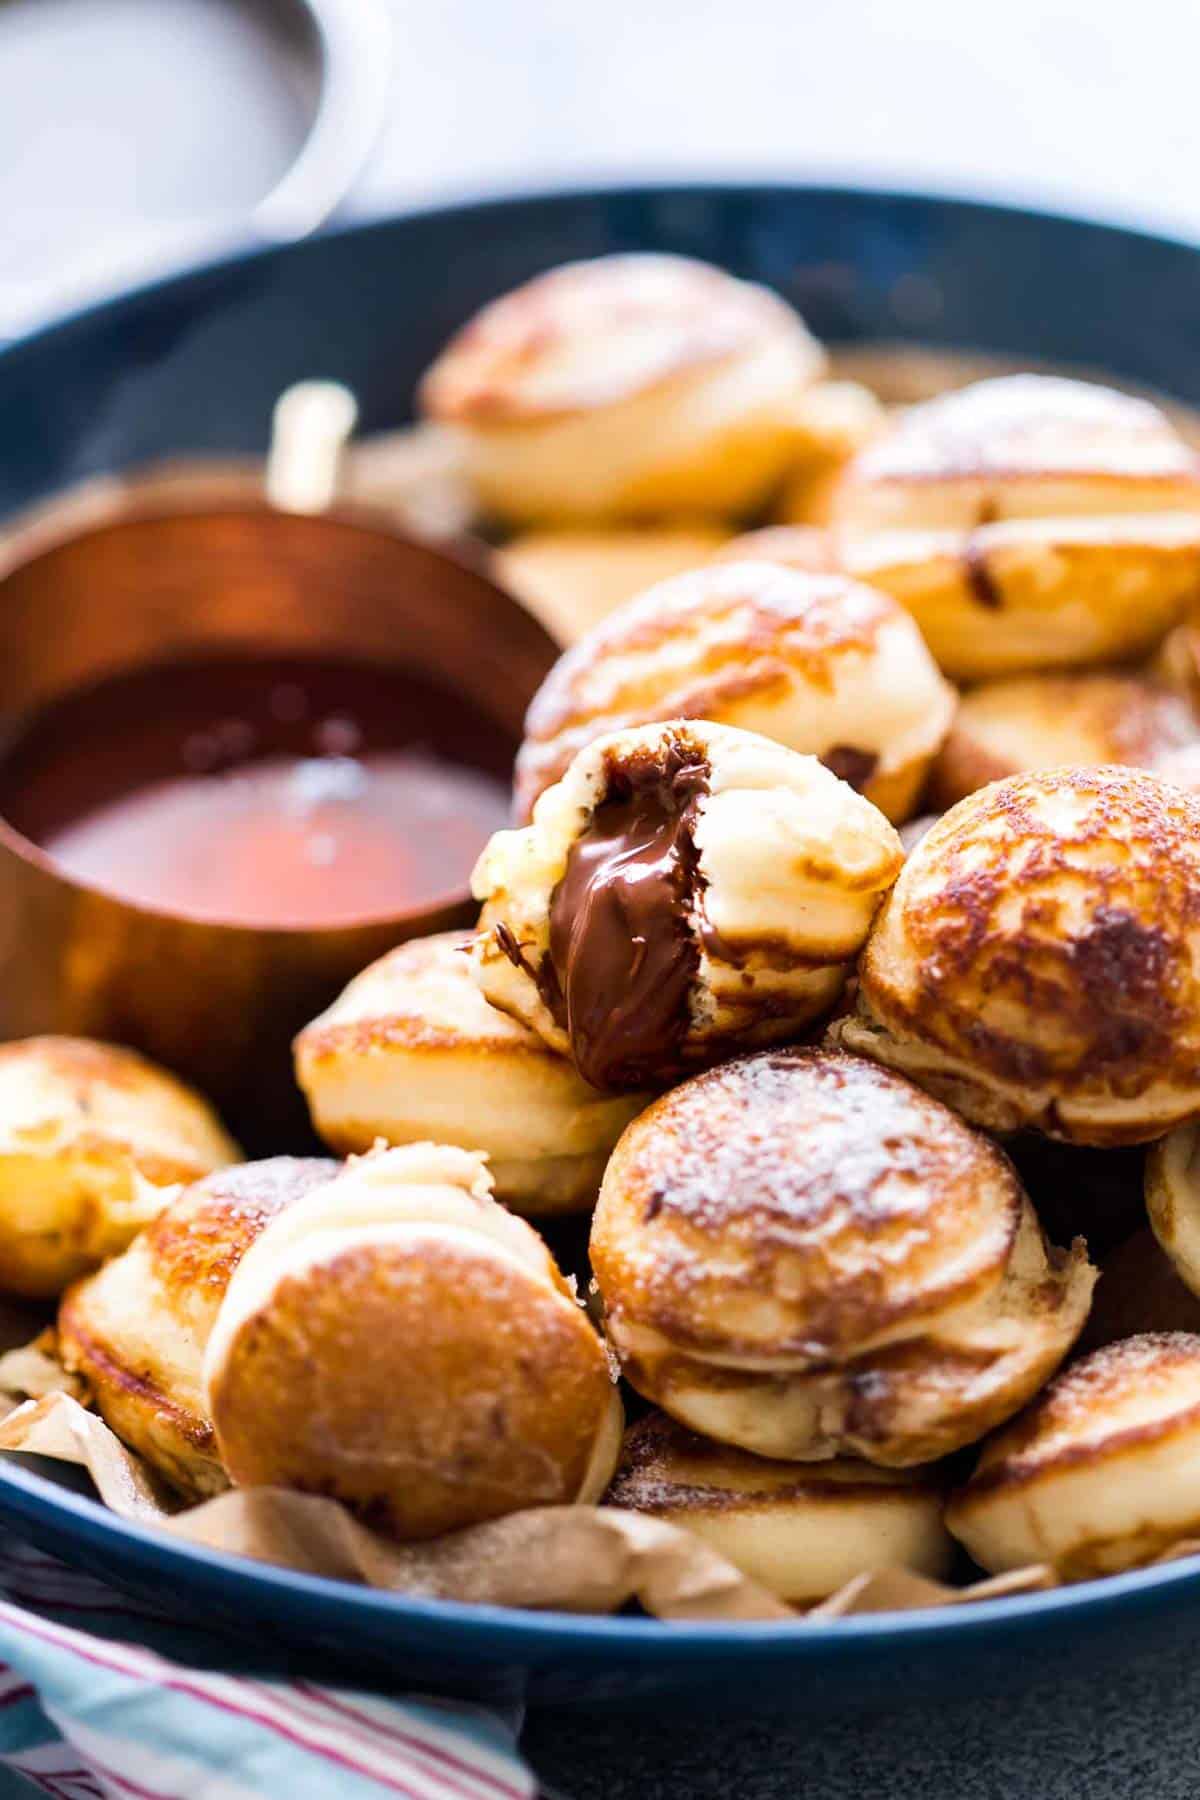 Chocolate Stuffed Mini Pancake Bites served with maple syrup on the side.